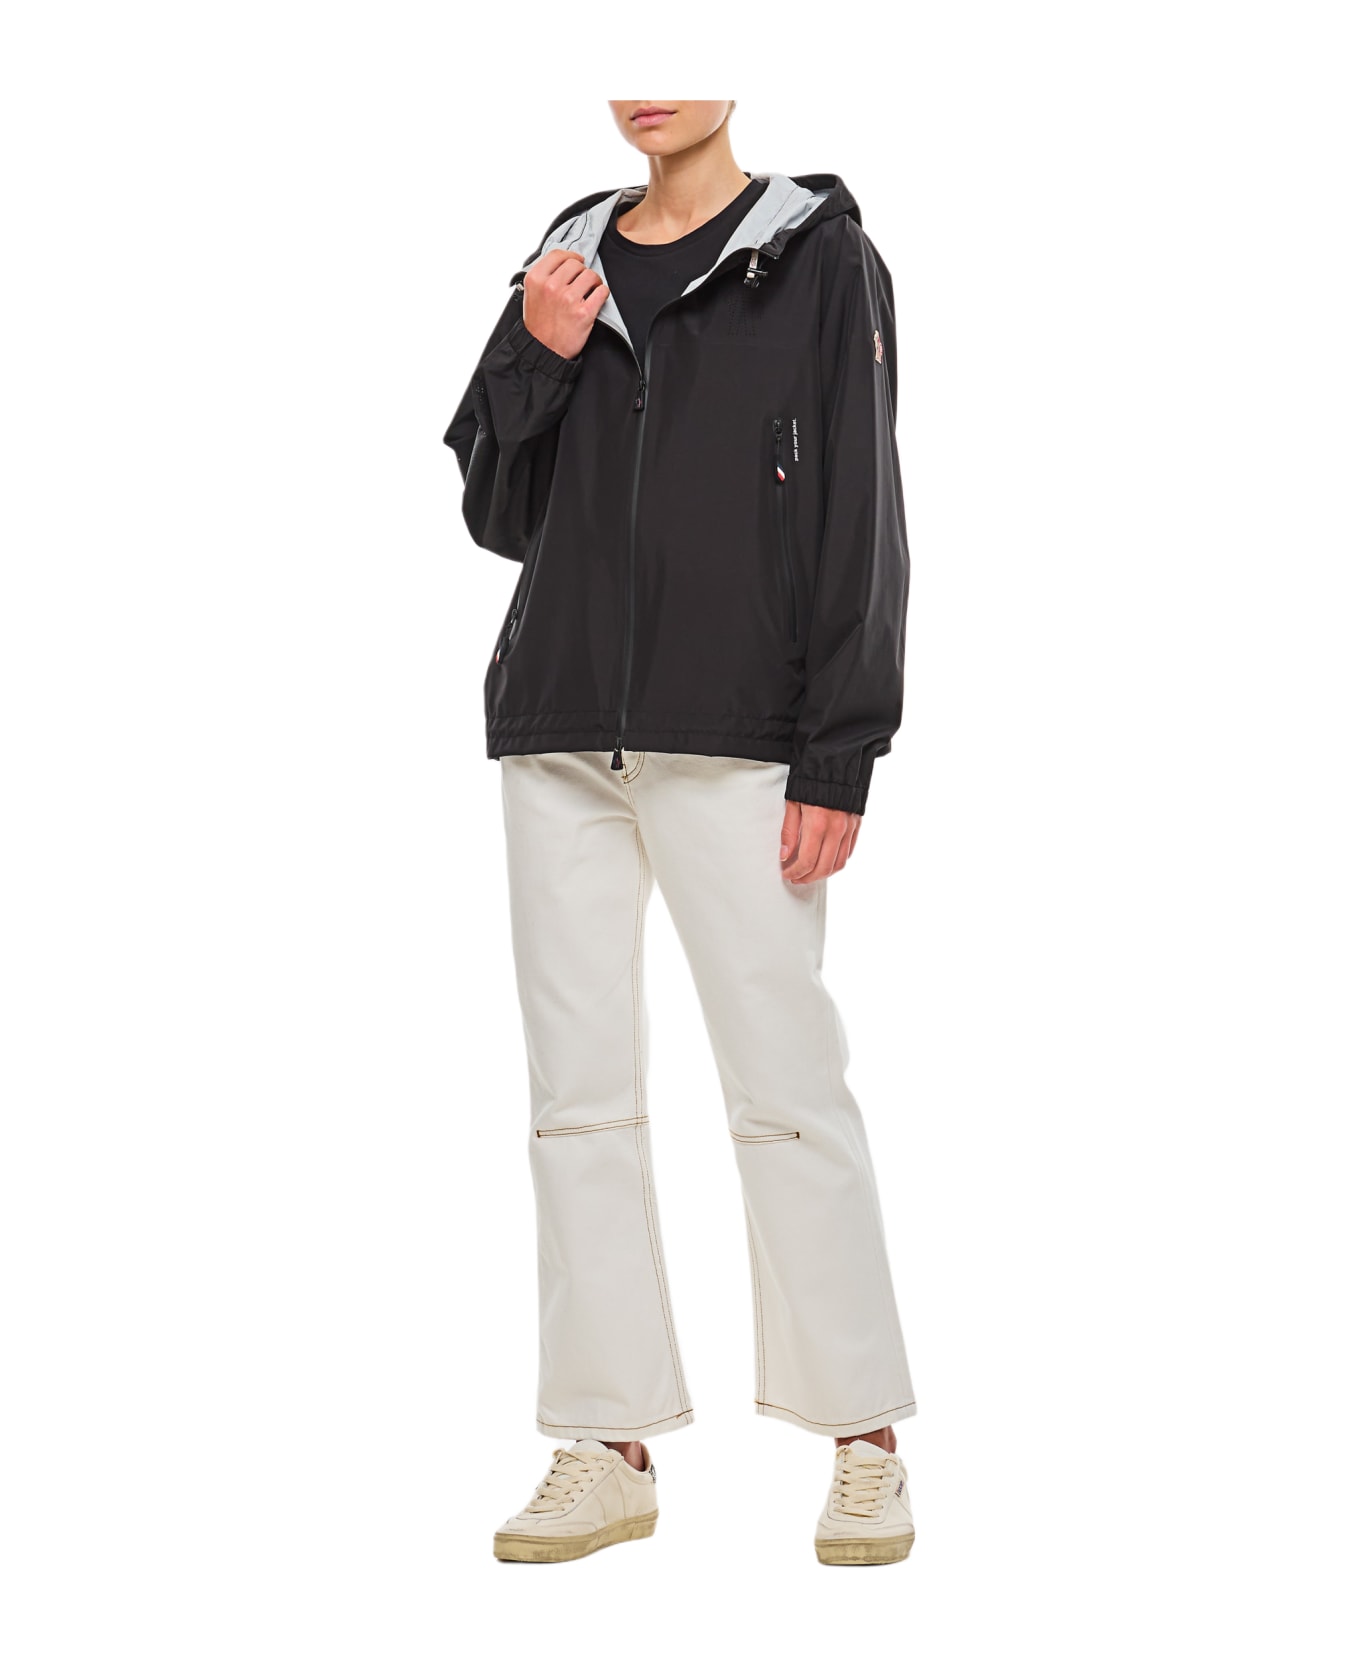 Moncler Grenoble Fanes Technical Fabric Jacket - Black ボトムス